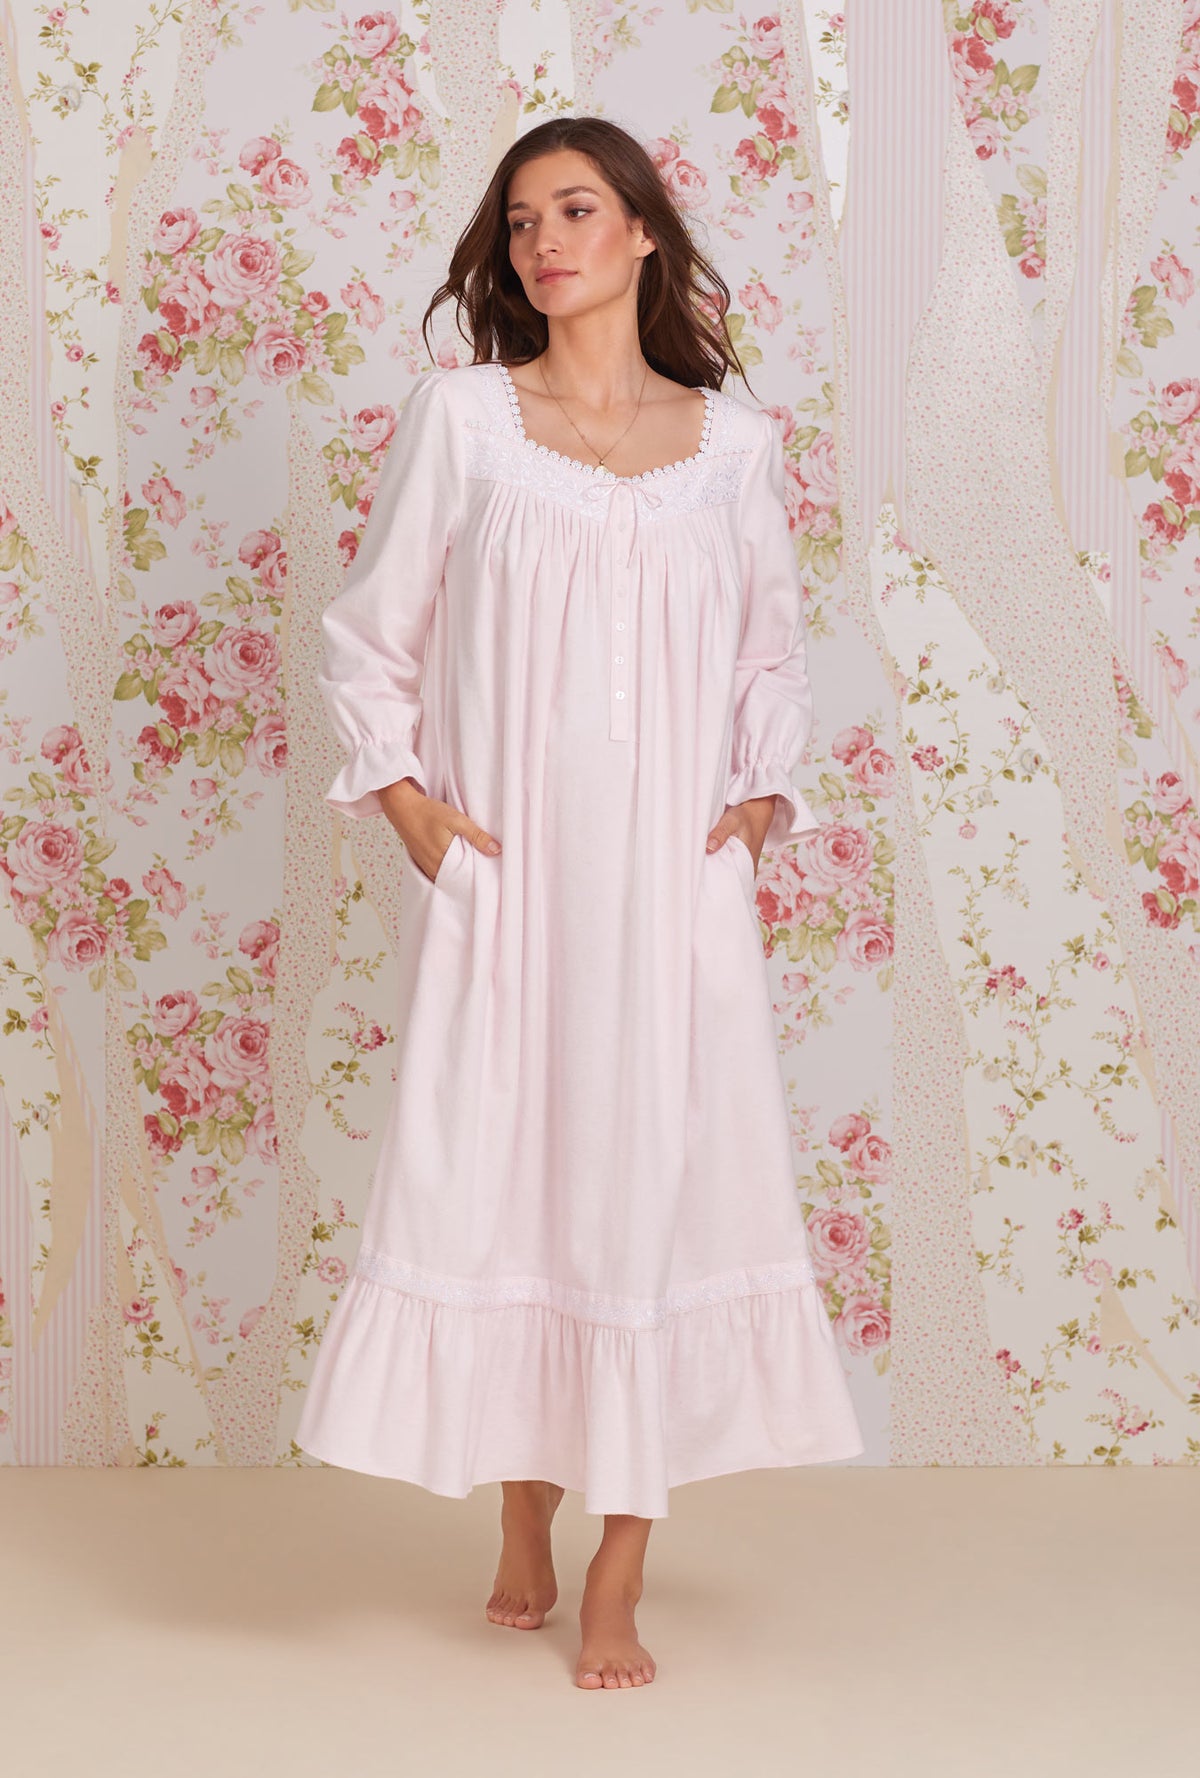 A lady wearing pink Long Sleeve Cotton Flannel Embroidery Long Nightgown 